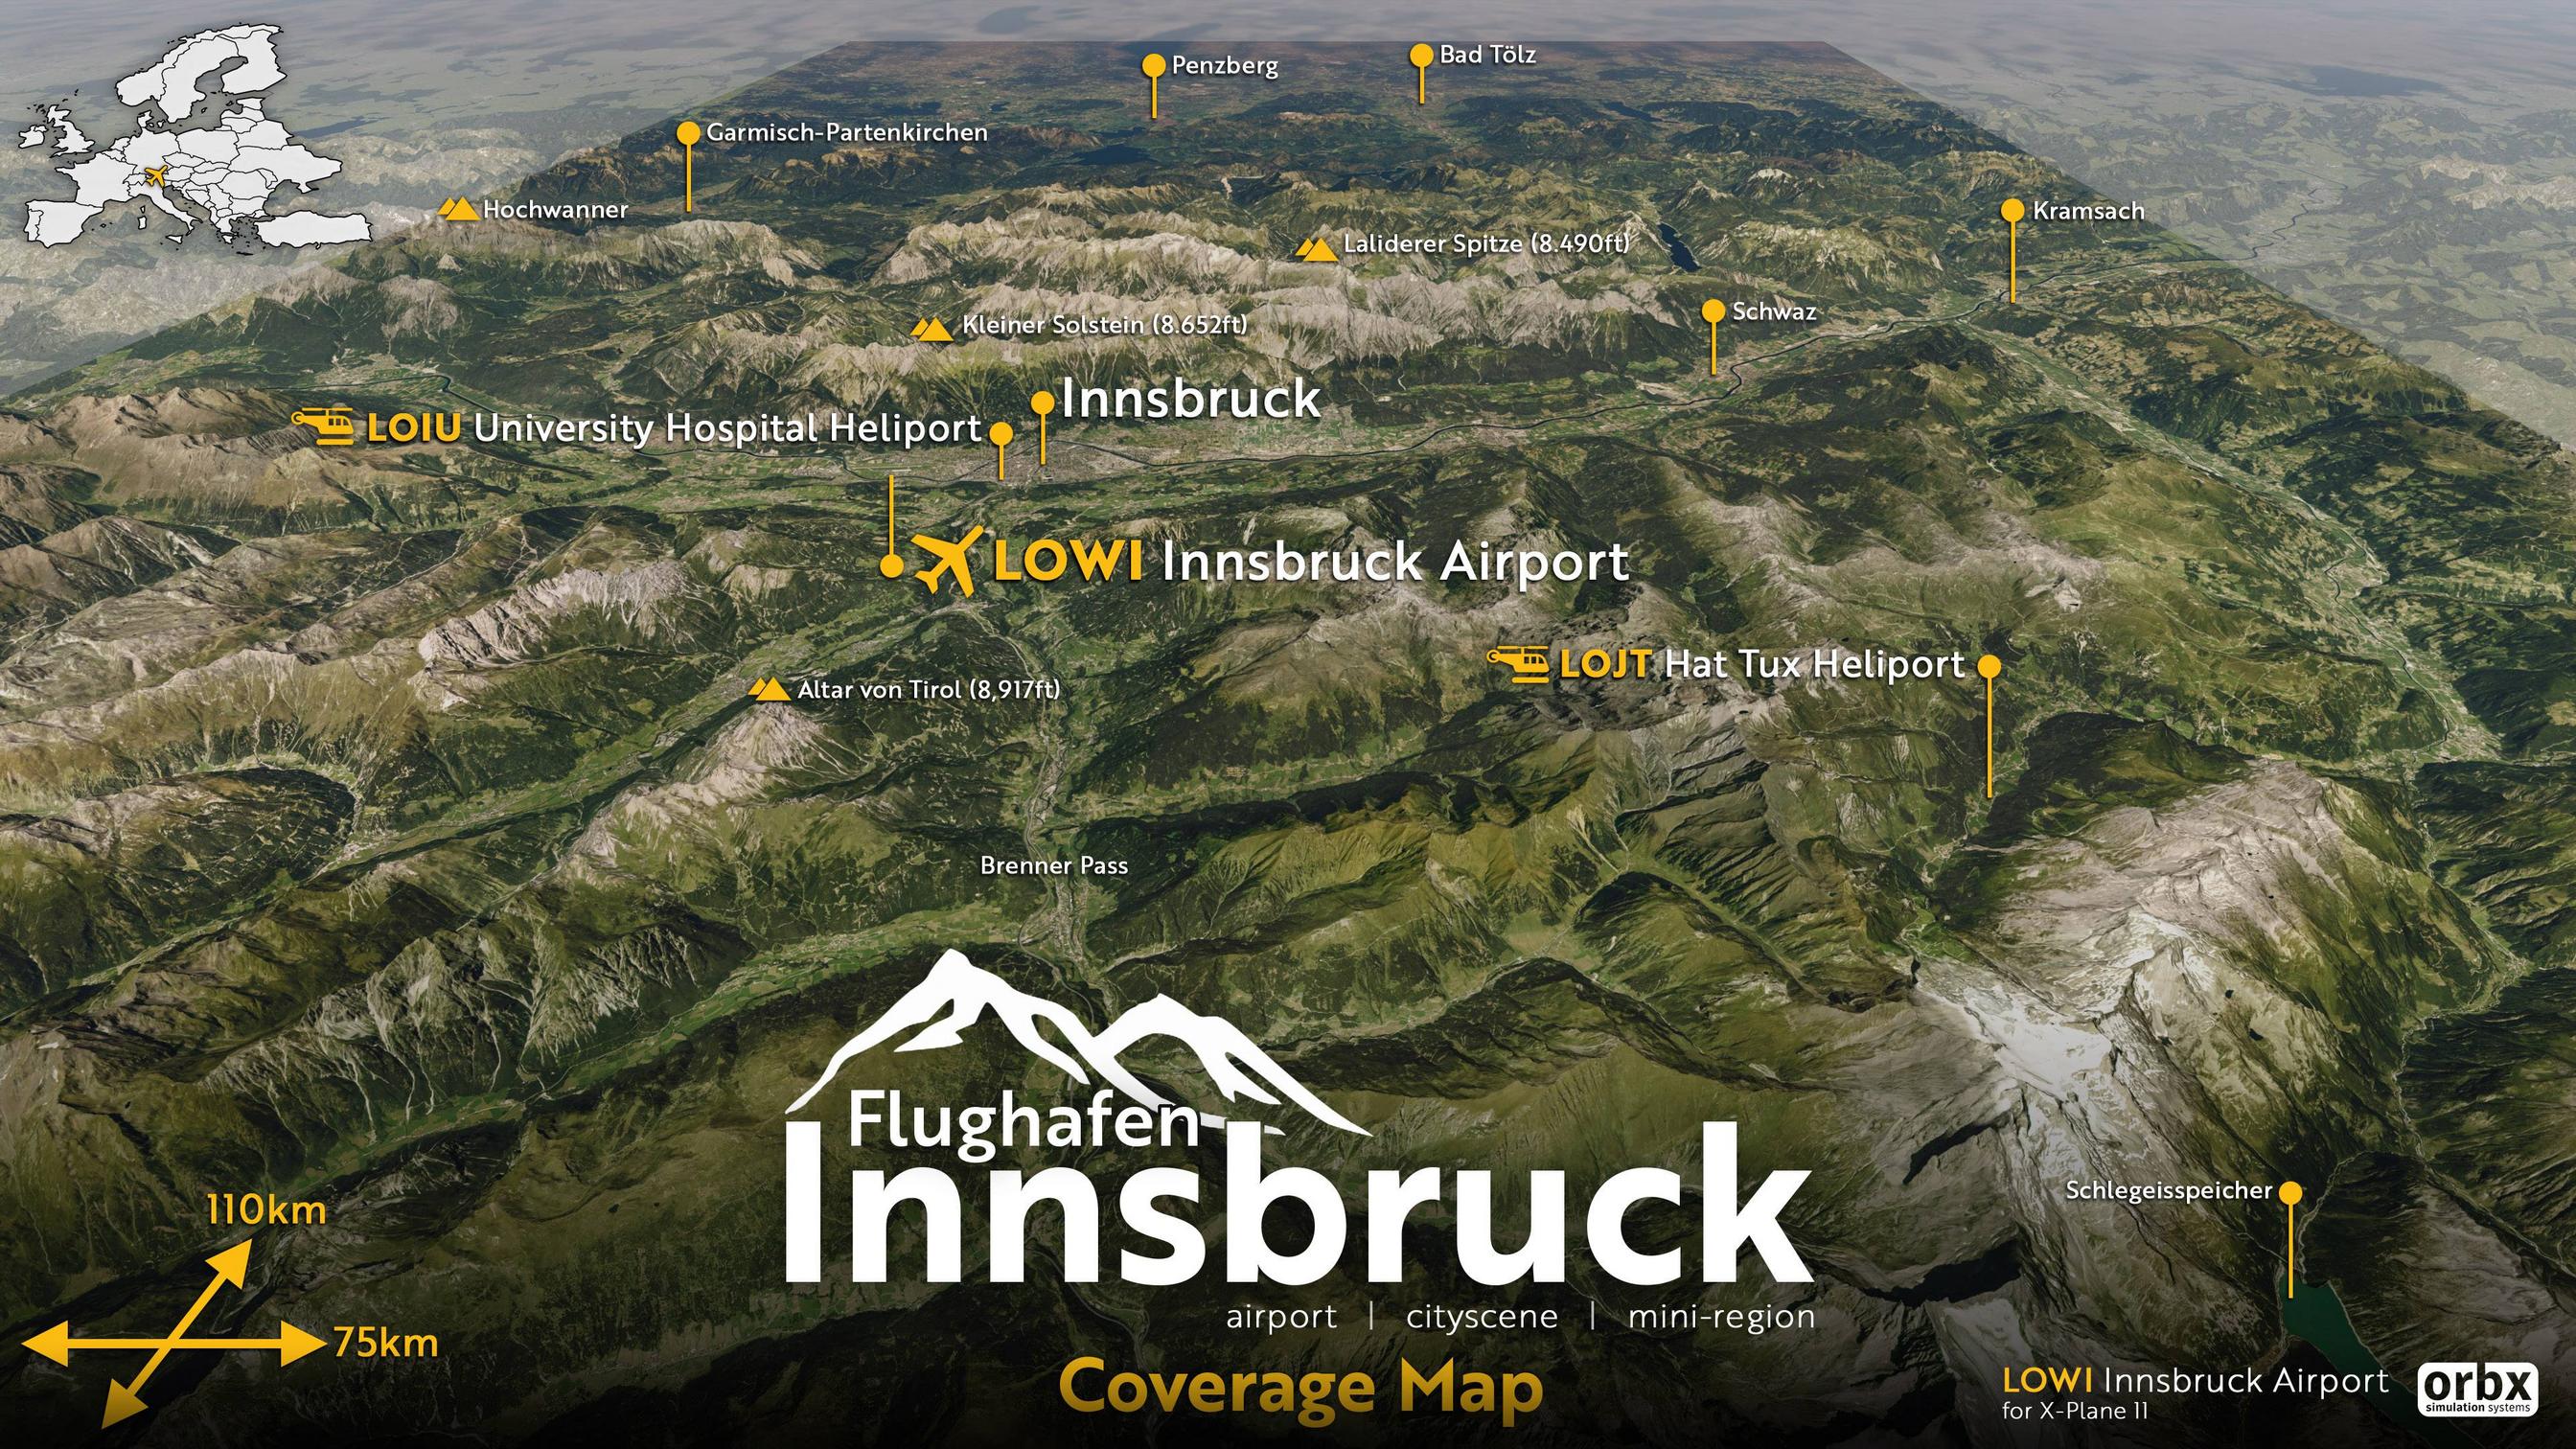 New Previews of Orbx LOWI Innsbruck on X-Plane 11